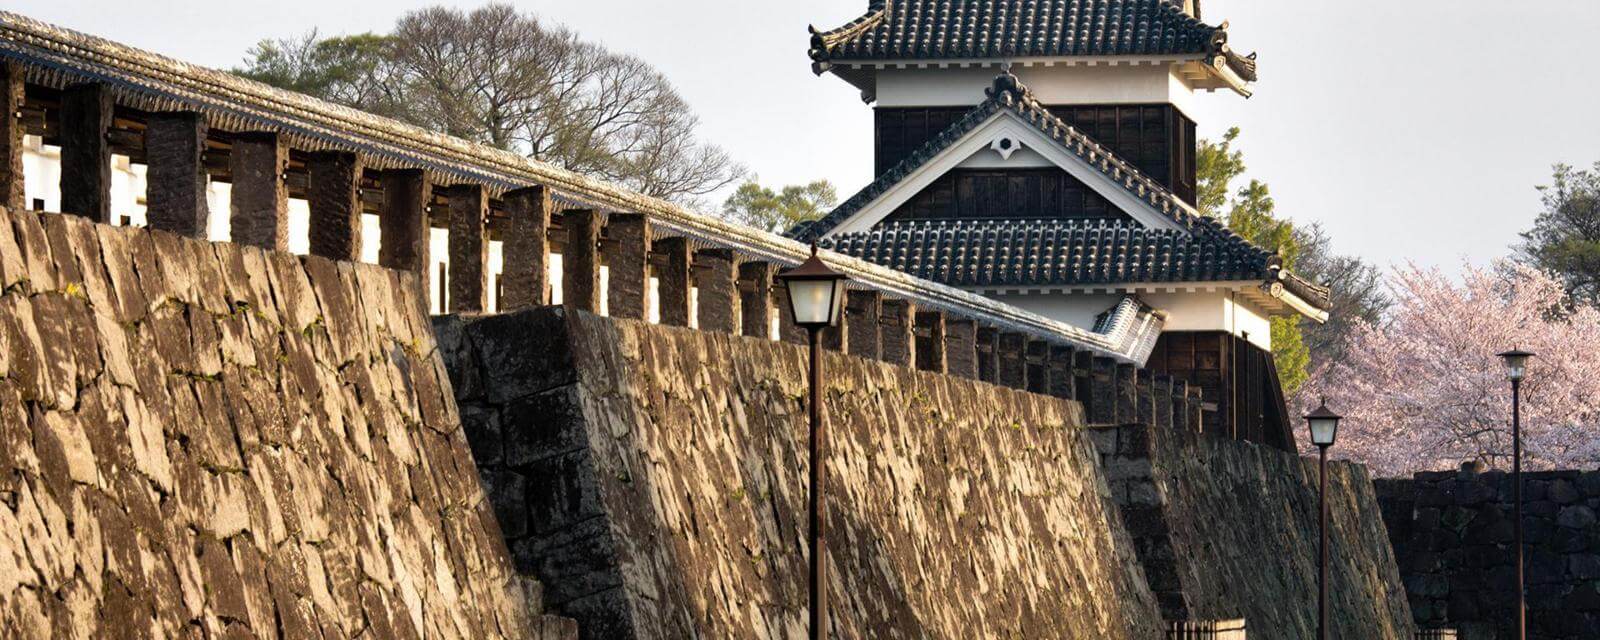 The Japanese castle that defied history